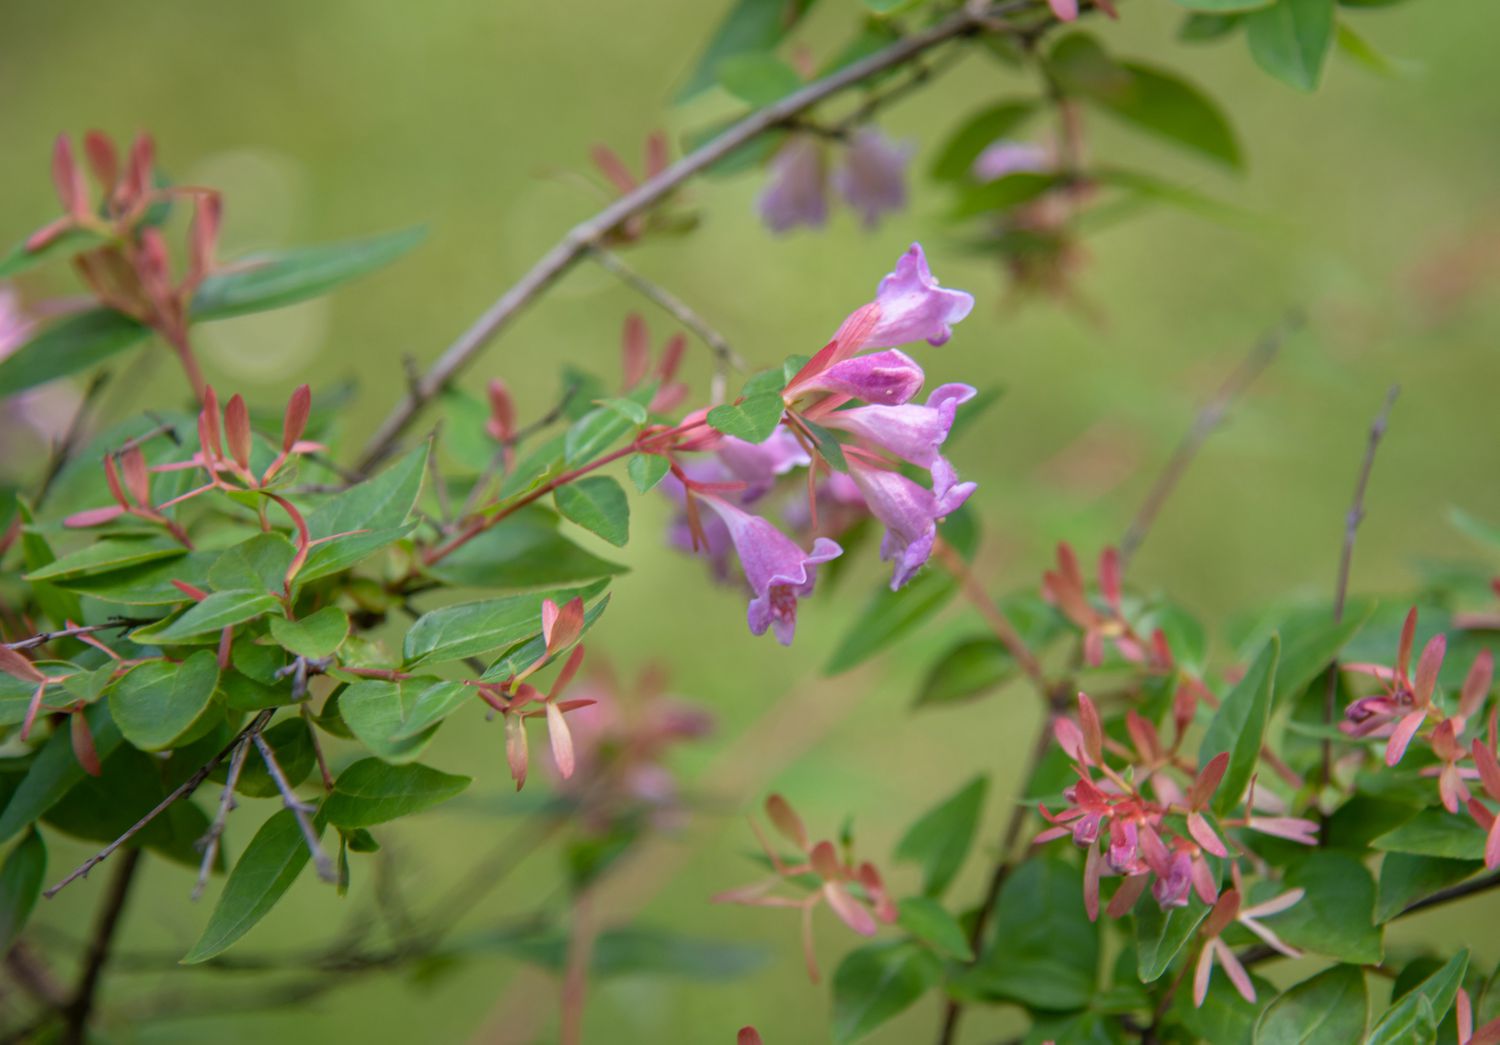 Glossy abelia shrub branch with purple-pink flowers and buds